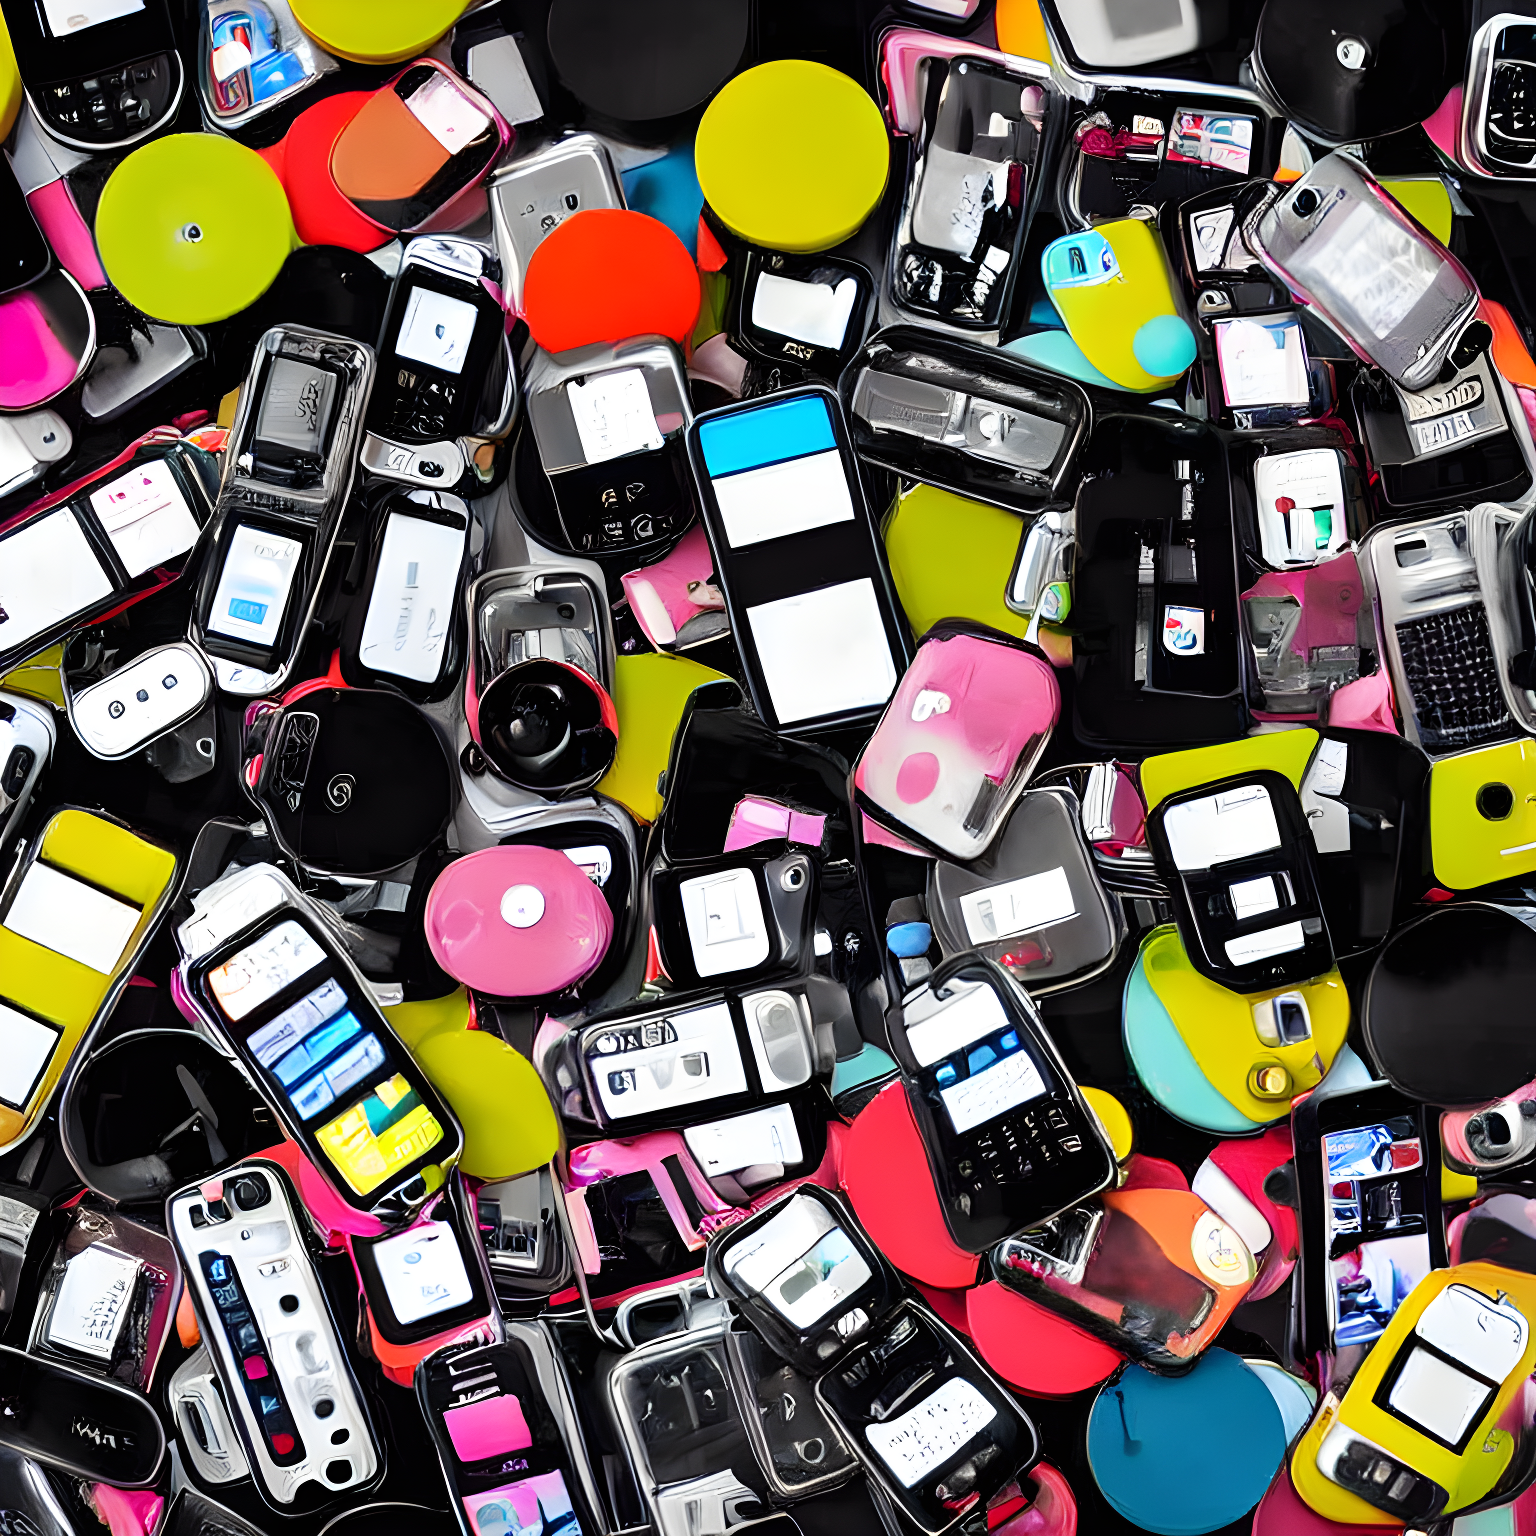 andy warhol style, stacks of cellphones, tweeting, thumbsticks on cellphone